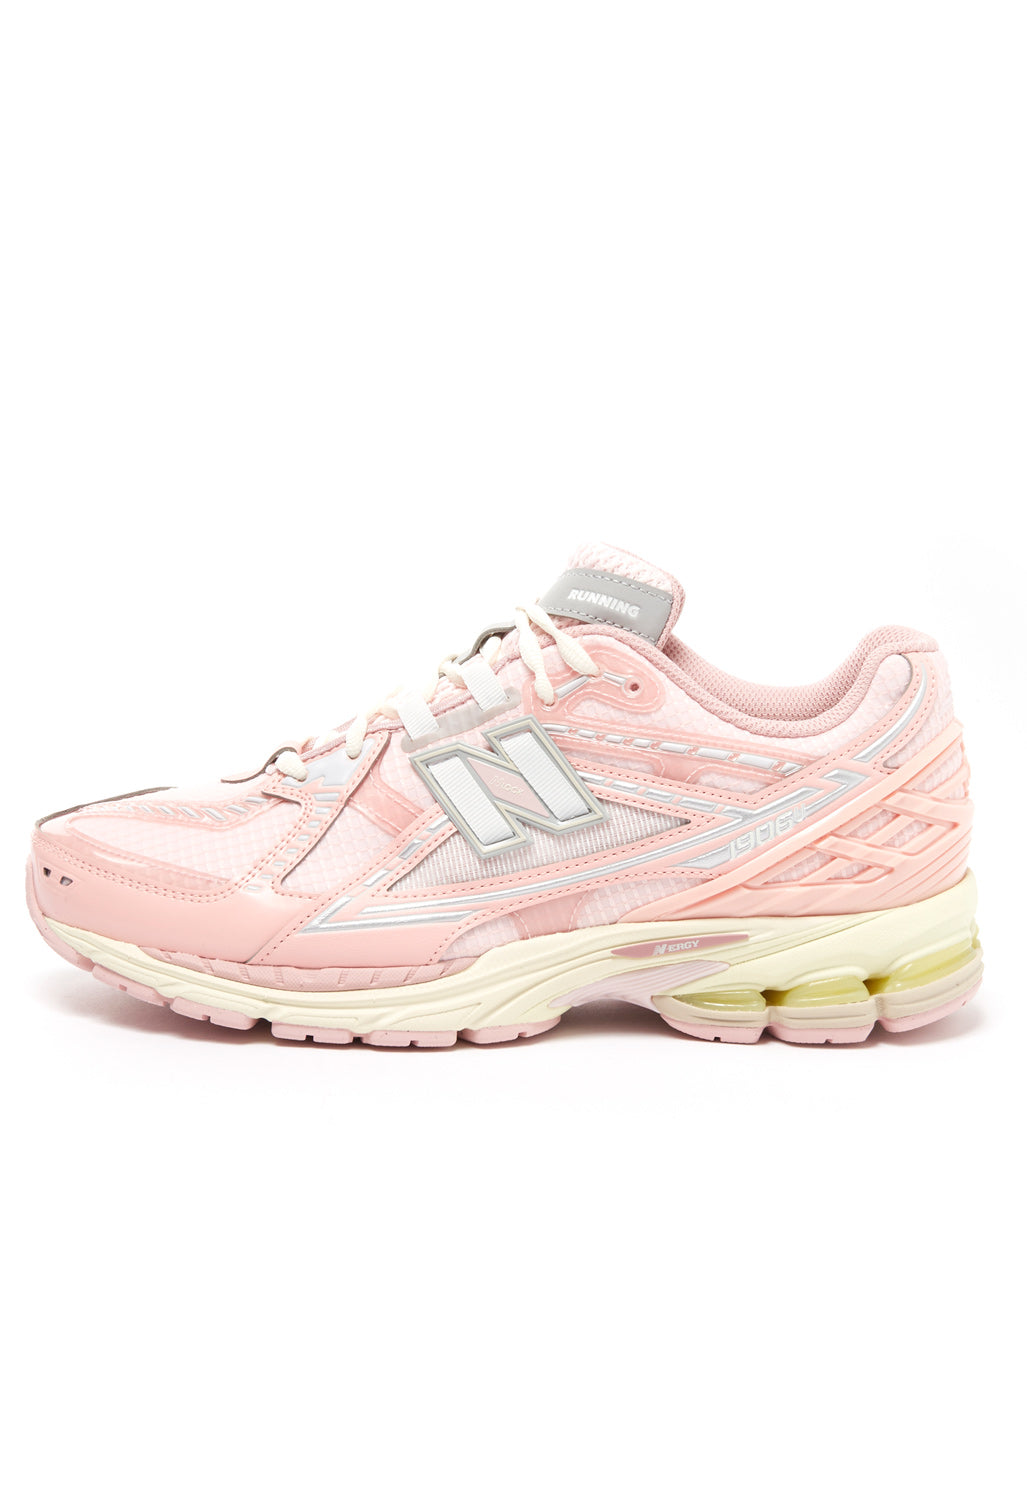 New Balance Lunar New Year 1906N Trainers - Shell Pink / Filament Pink / Rosewood